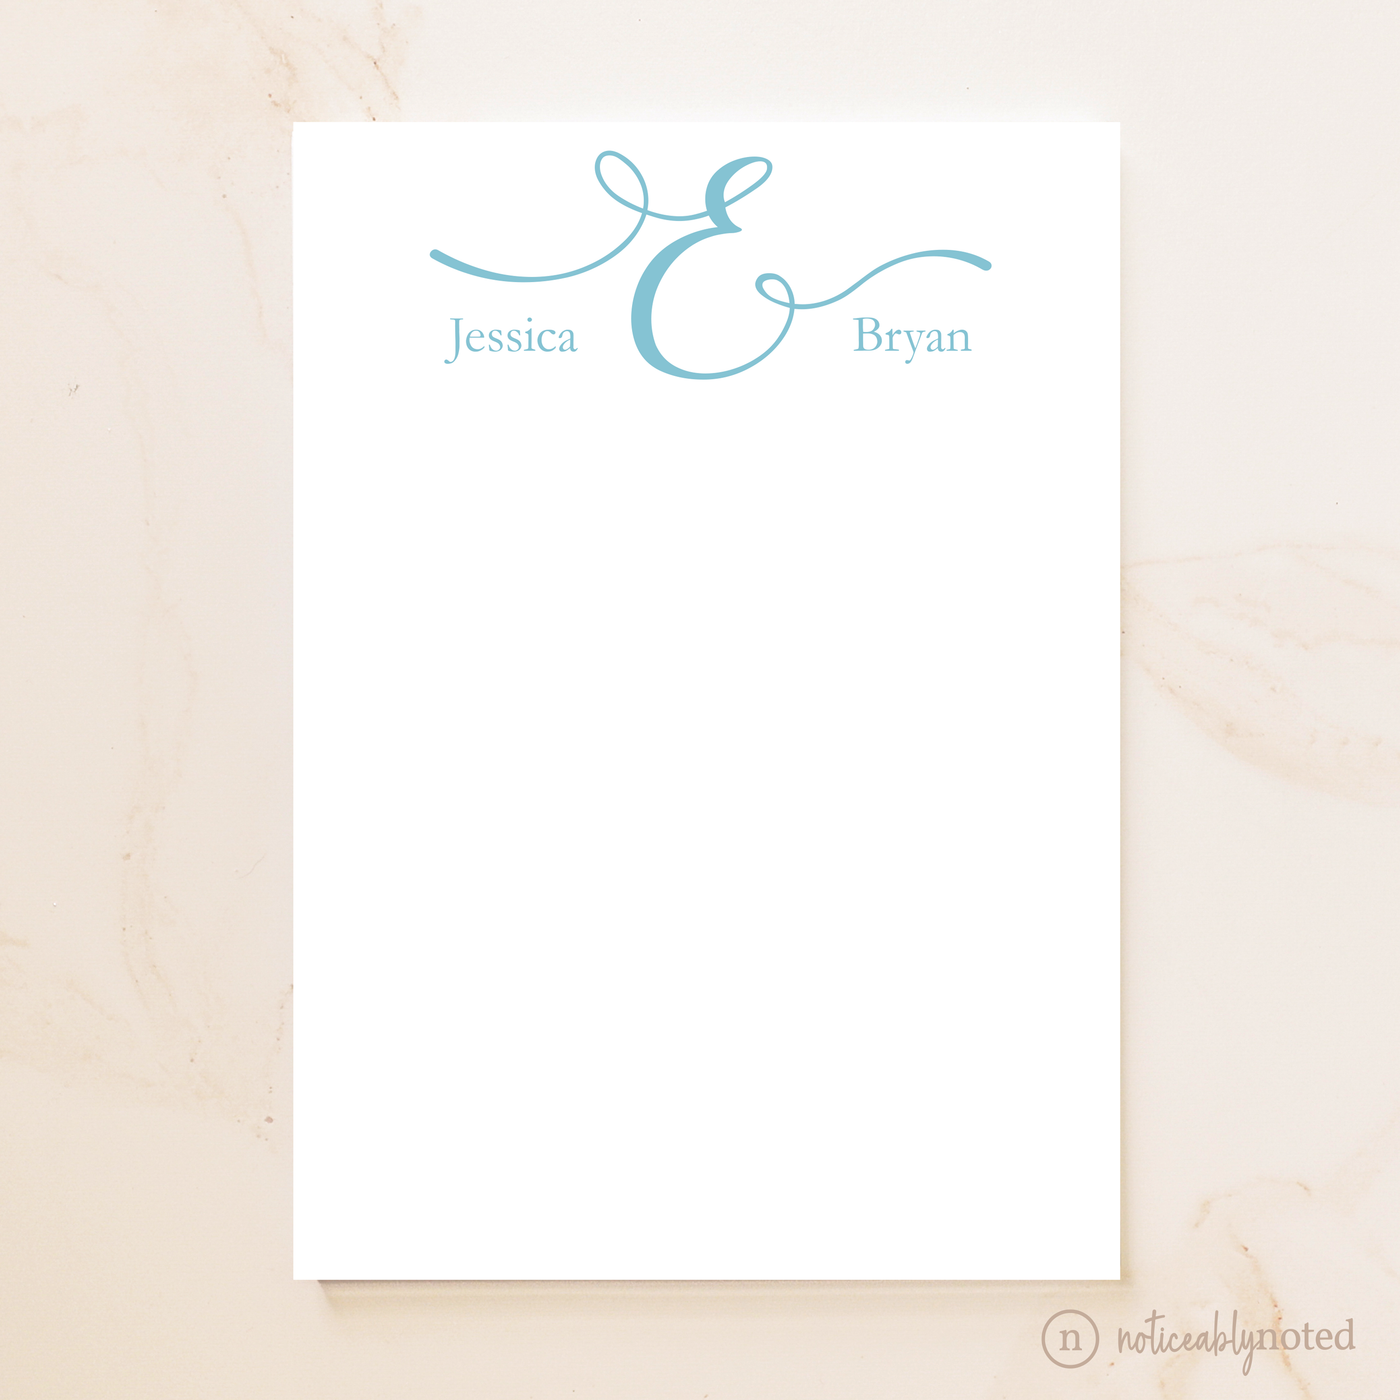 Couple Personalized Notepad | Noticeably Noted